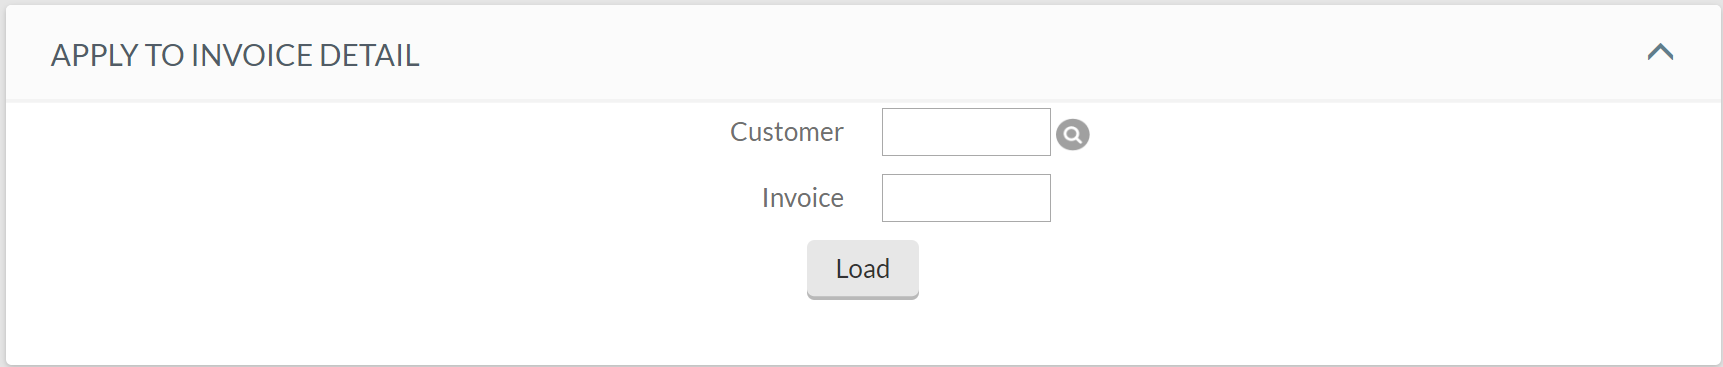 ApplicationApplytoInvoiceDetail1.png